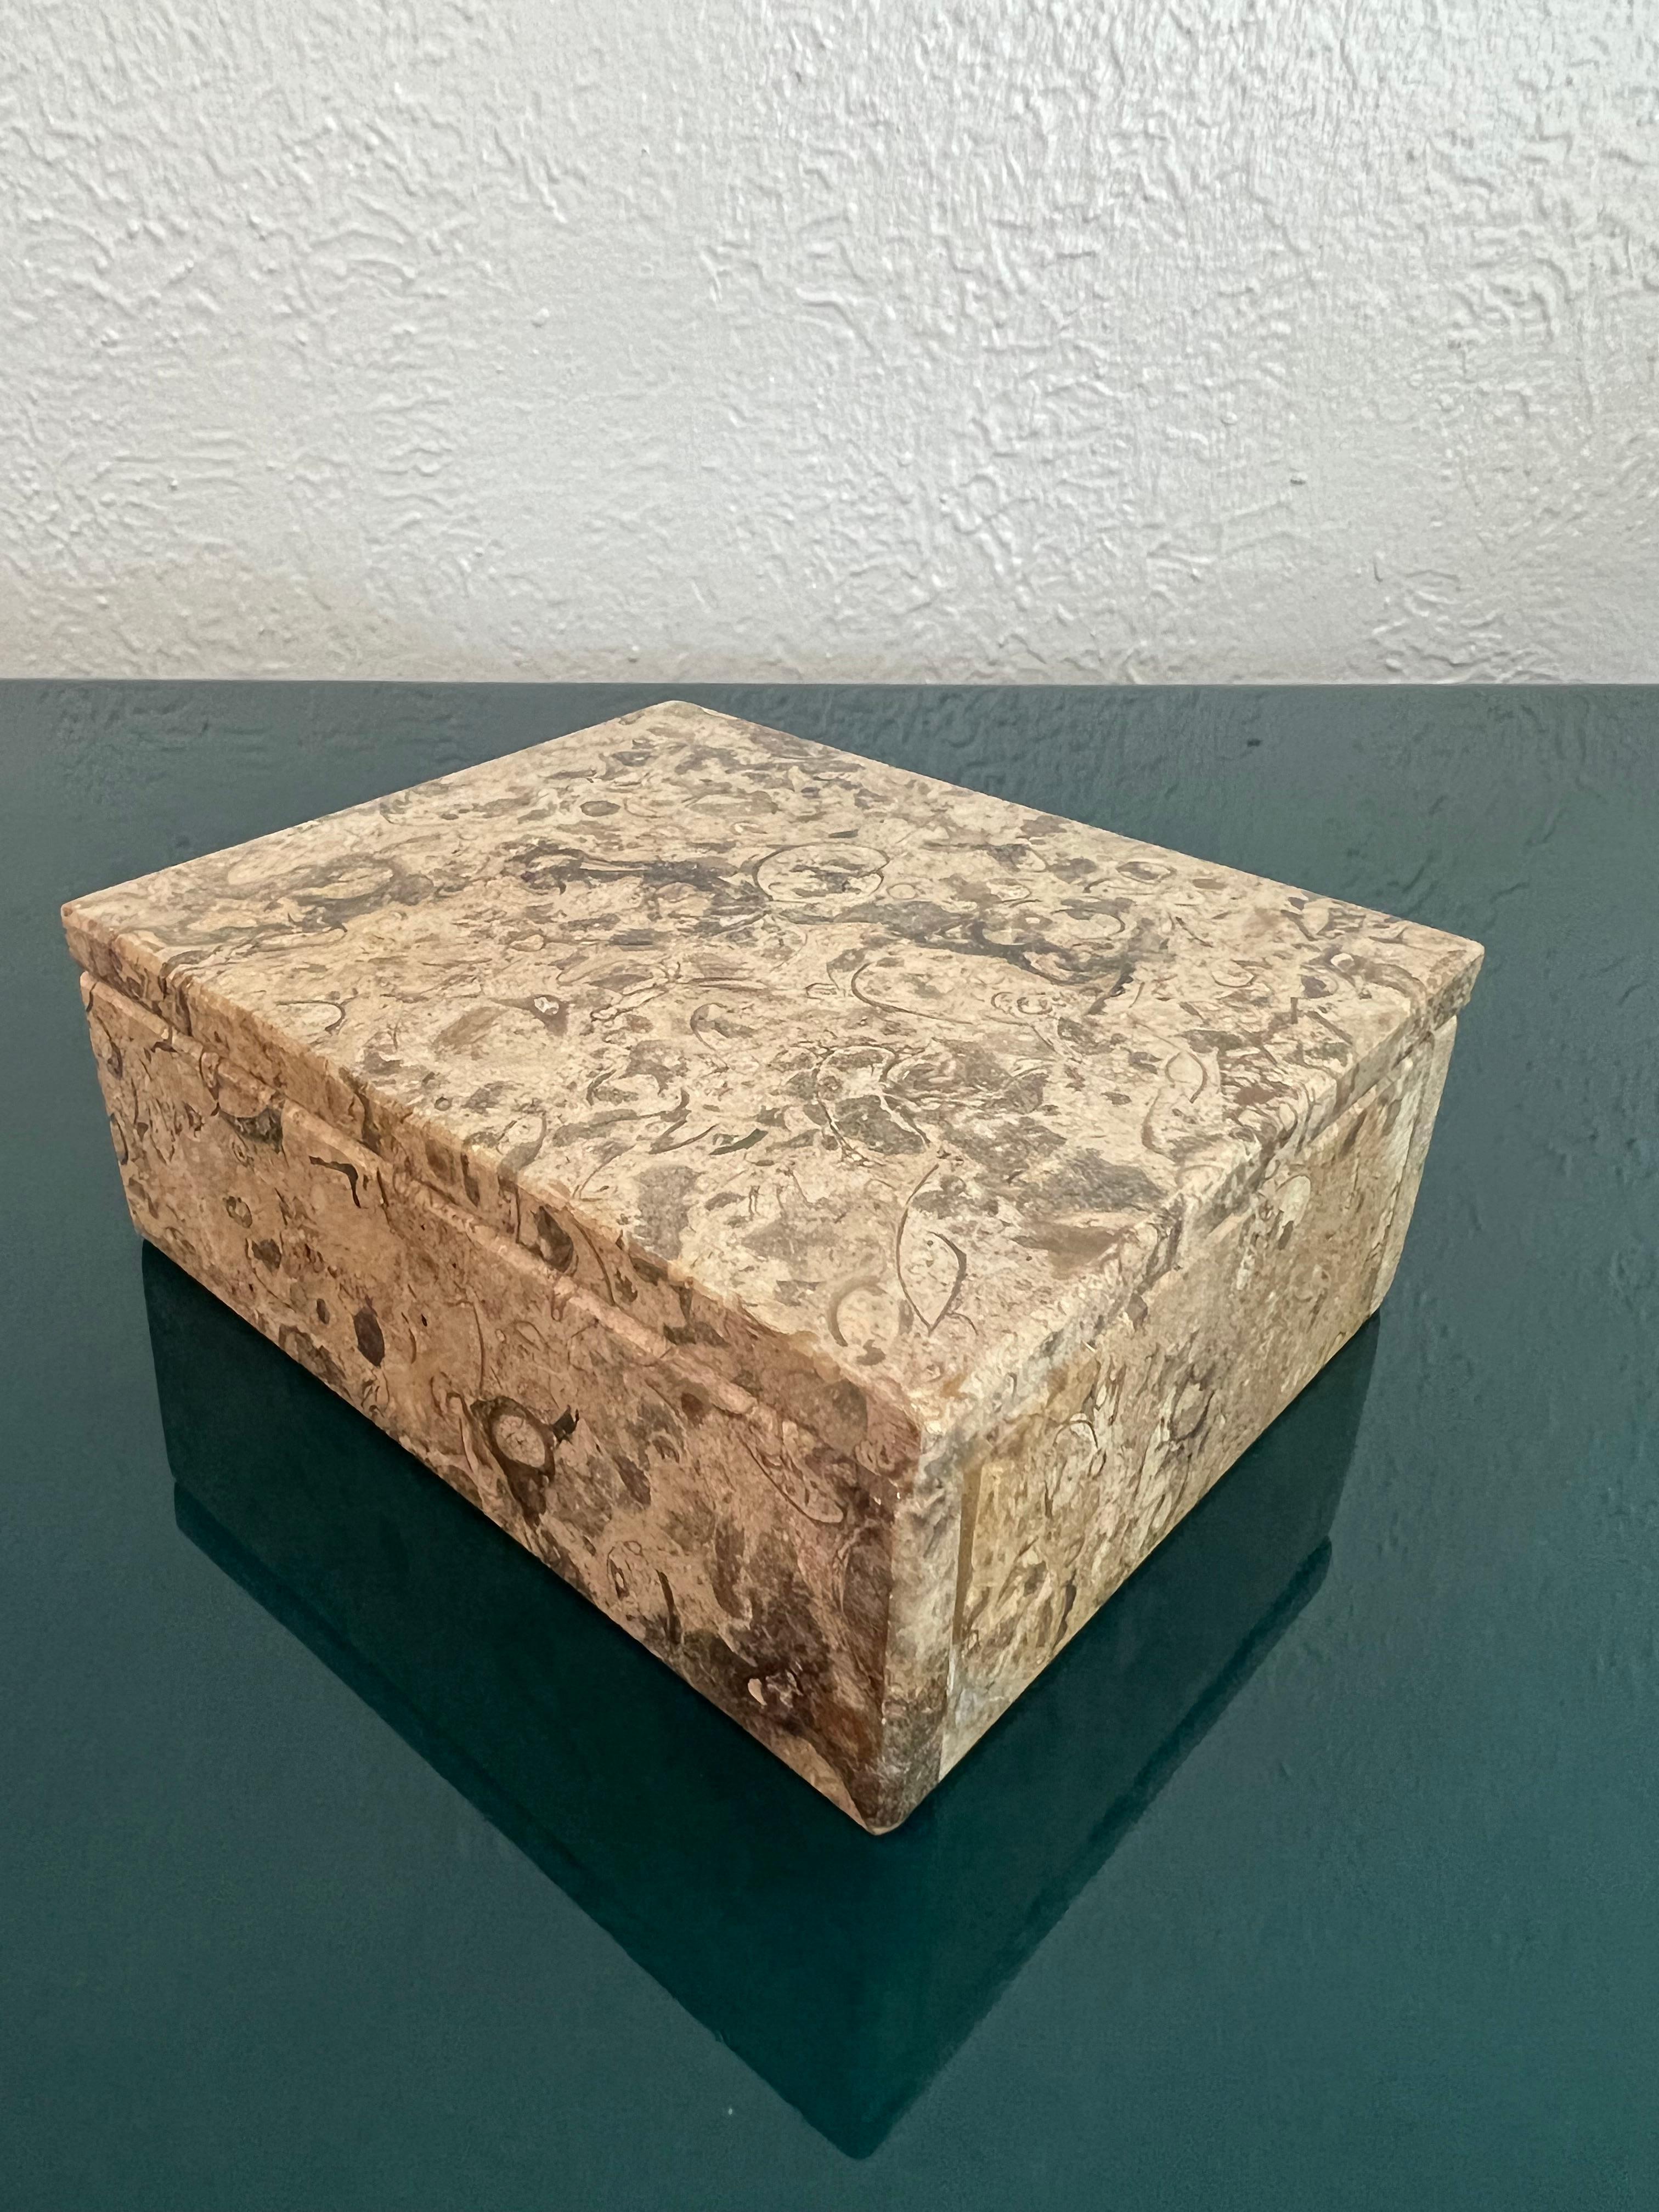 Fossil stone lidded box. 

Would work well in a variety of interiors such as modern, mid century modern, Hollywood regency, etc. Piece blends seamlessly with other designers such as Warren Platner, Paul Evans, Gabriella Crespi, Edward Wormley,